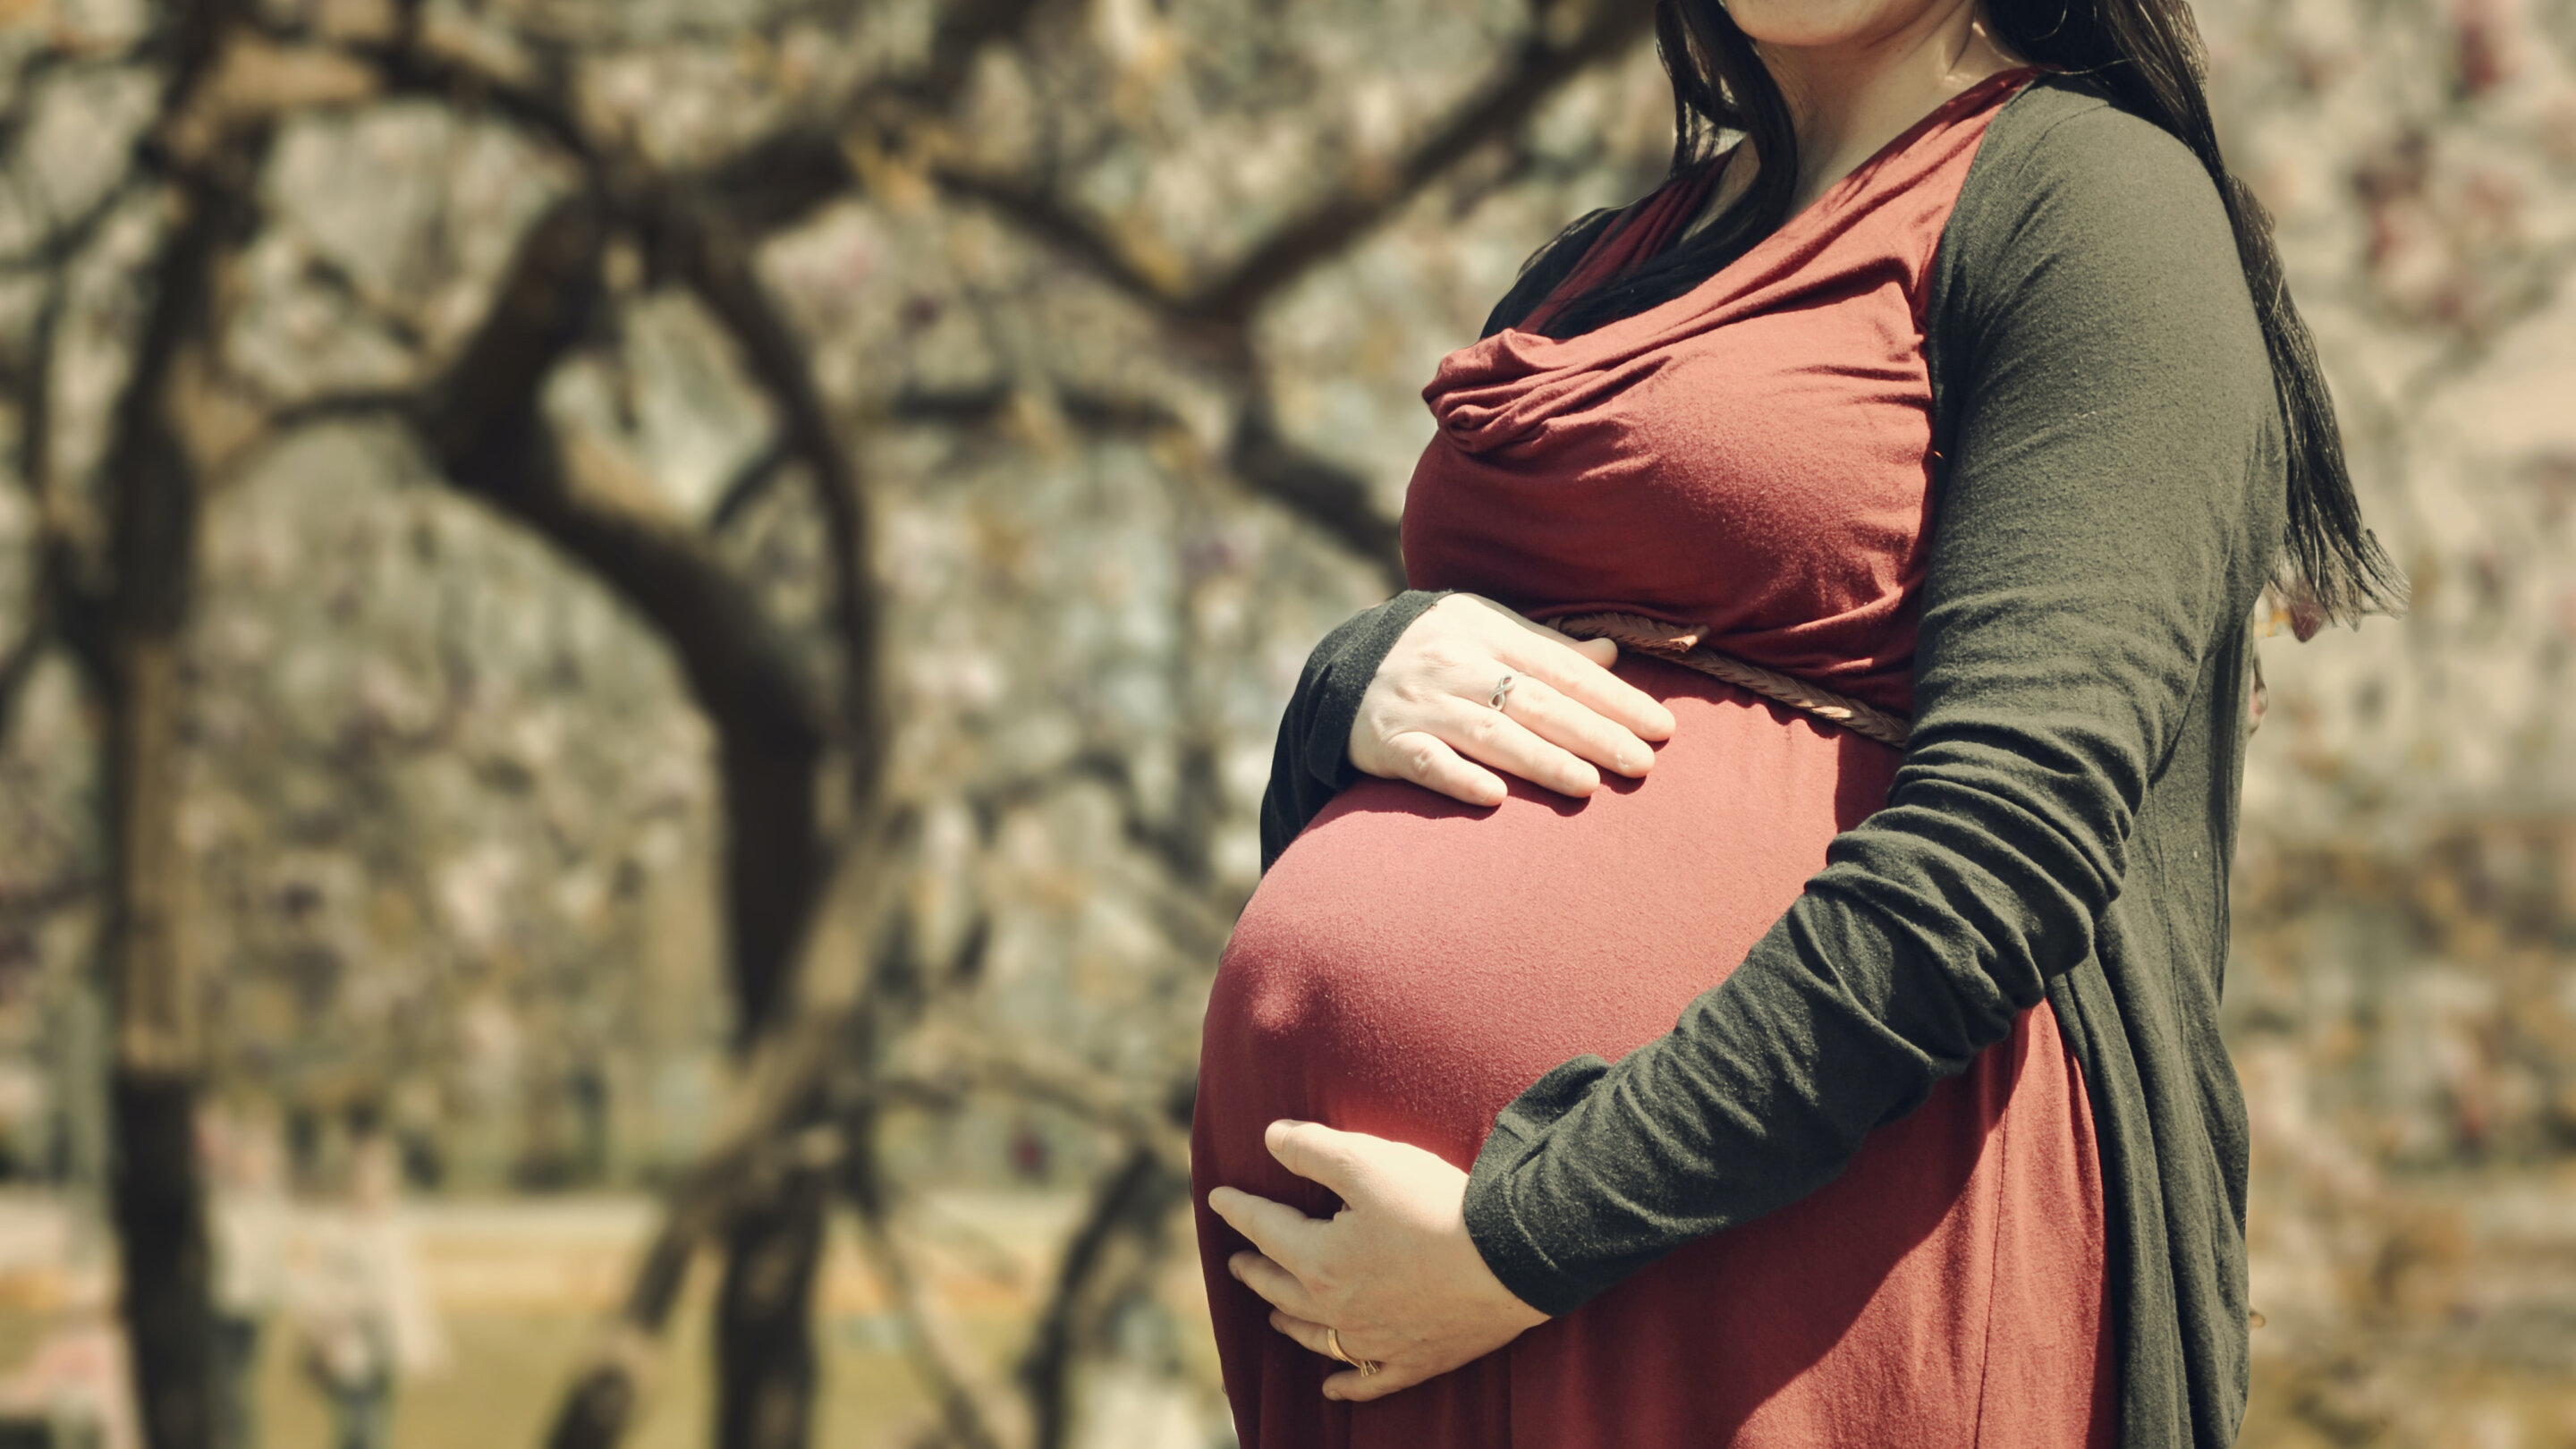 Pregnant women are missing vital nutrients, a situation that could